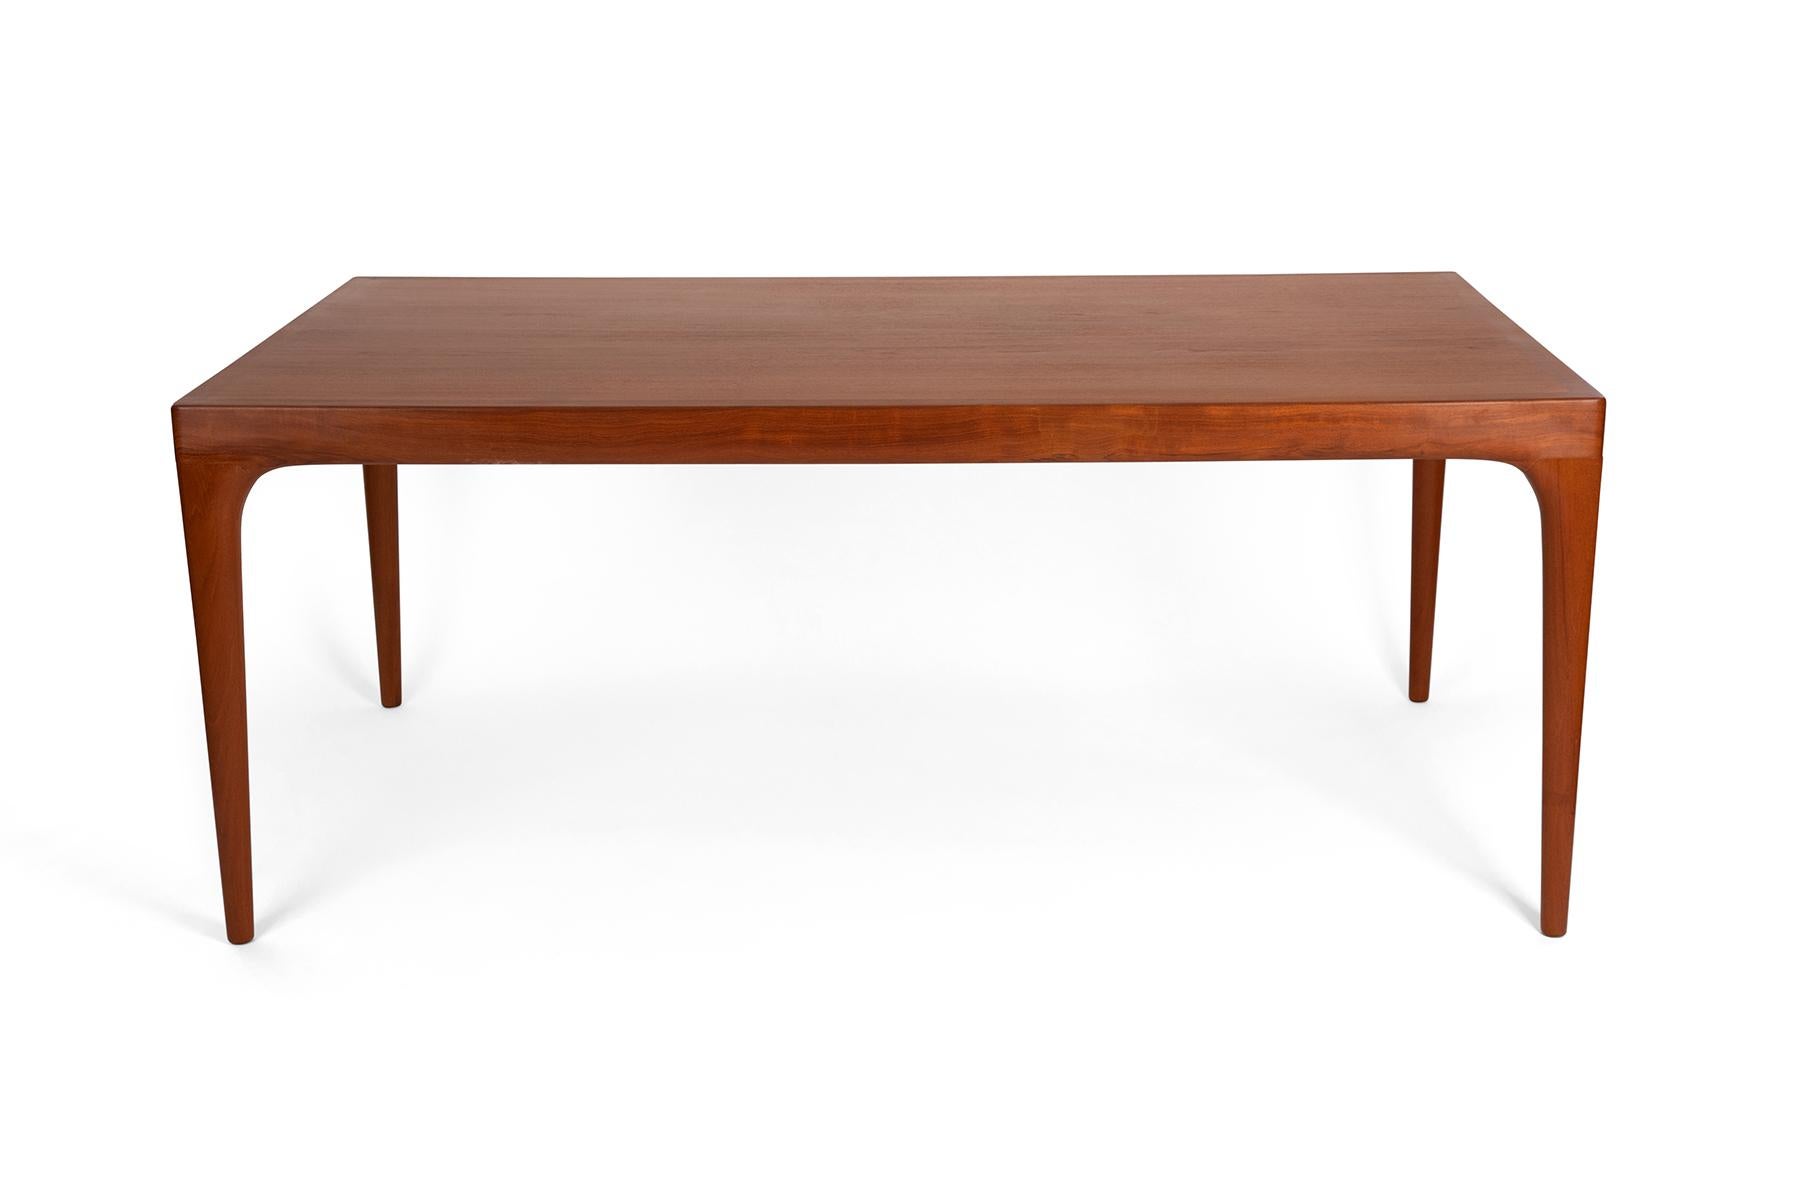 Newly refinished dining room table designed by Johannes Andersen circa early 1960's.
The table features sculpted solid teak legs and an extendable shelf that is cleverly stored underneath and can be pulled out when you need extra space for serving